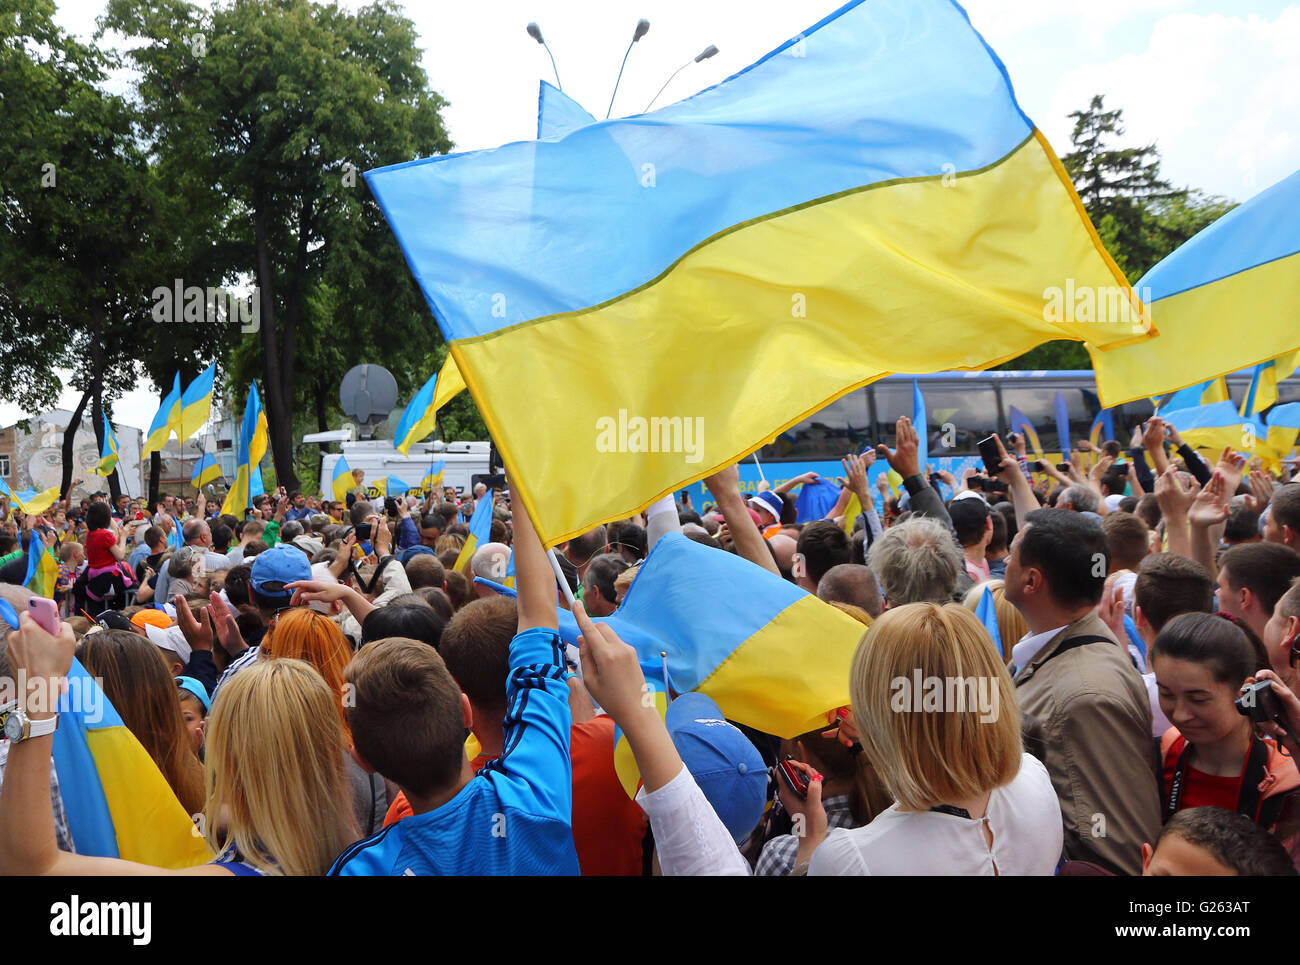 KYIV, UKRAINE - MAY 22, 2016: Supporters of the National Football Team of Ukraine at the Ceremony of the Departure for the European Championship 2016. Mykhailivska Square in Kyiv, Ukraine Stock Photo